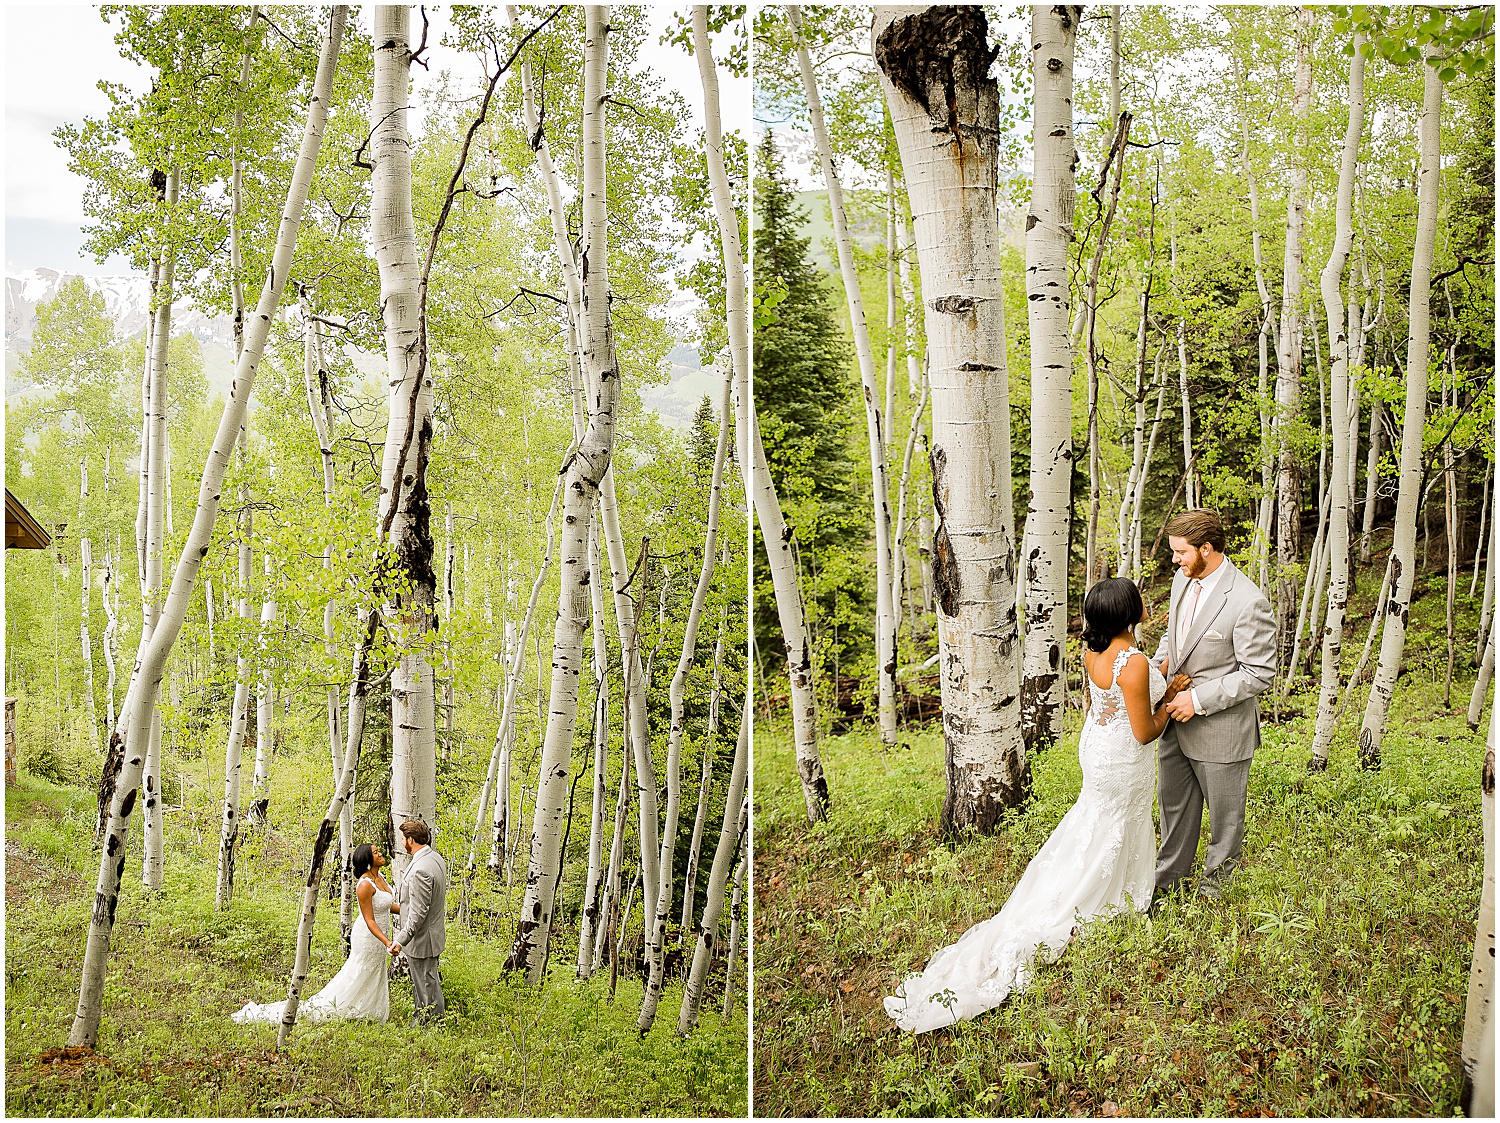 Mountain Village Wedding Photos, Telluride Wedding Photographer, mountain wedding, summer wedding, Telluride photographer, Colorado photographer, destination photographer, bride, the first look, wedding details, wedding dress, groom, outdoors, rustic, wedding day, tie the knot